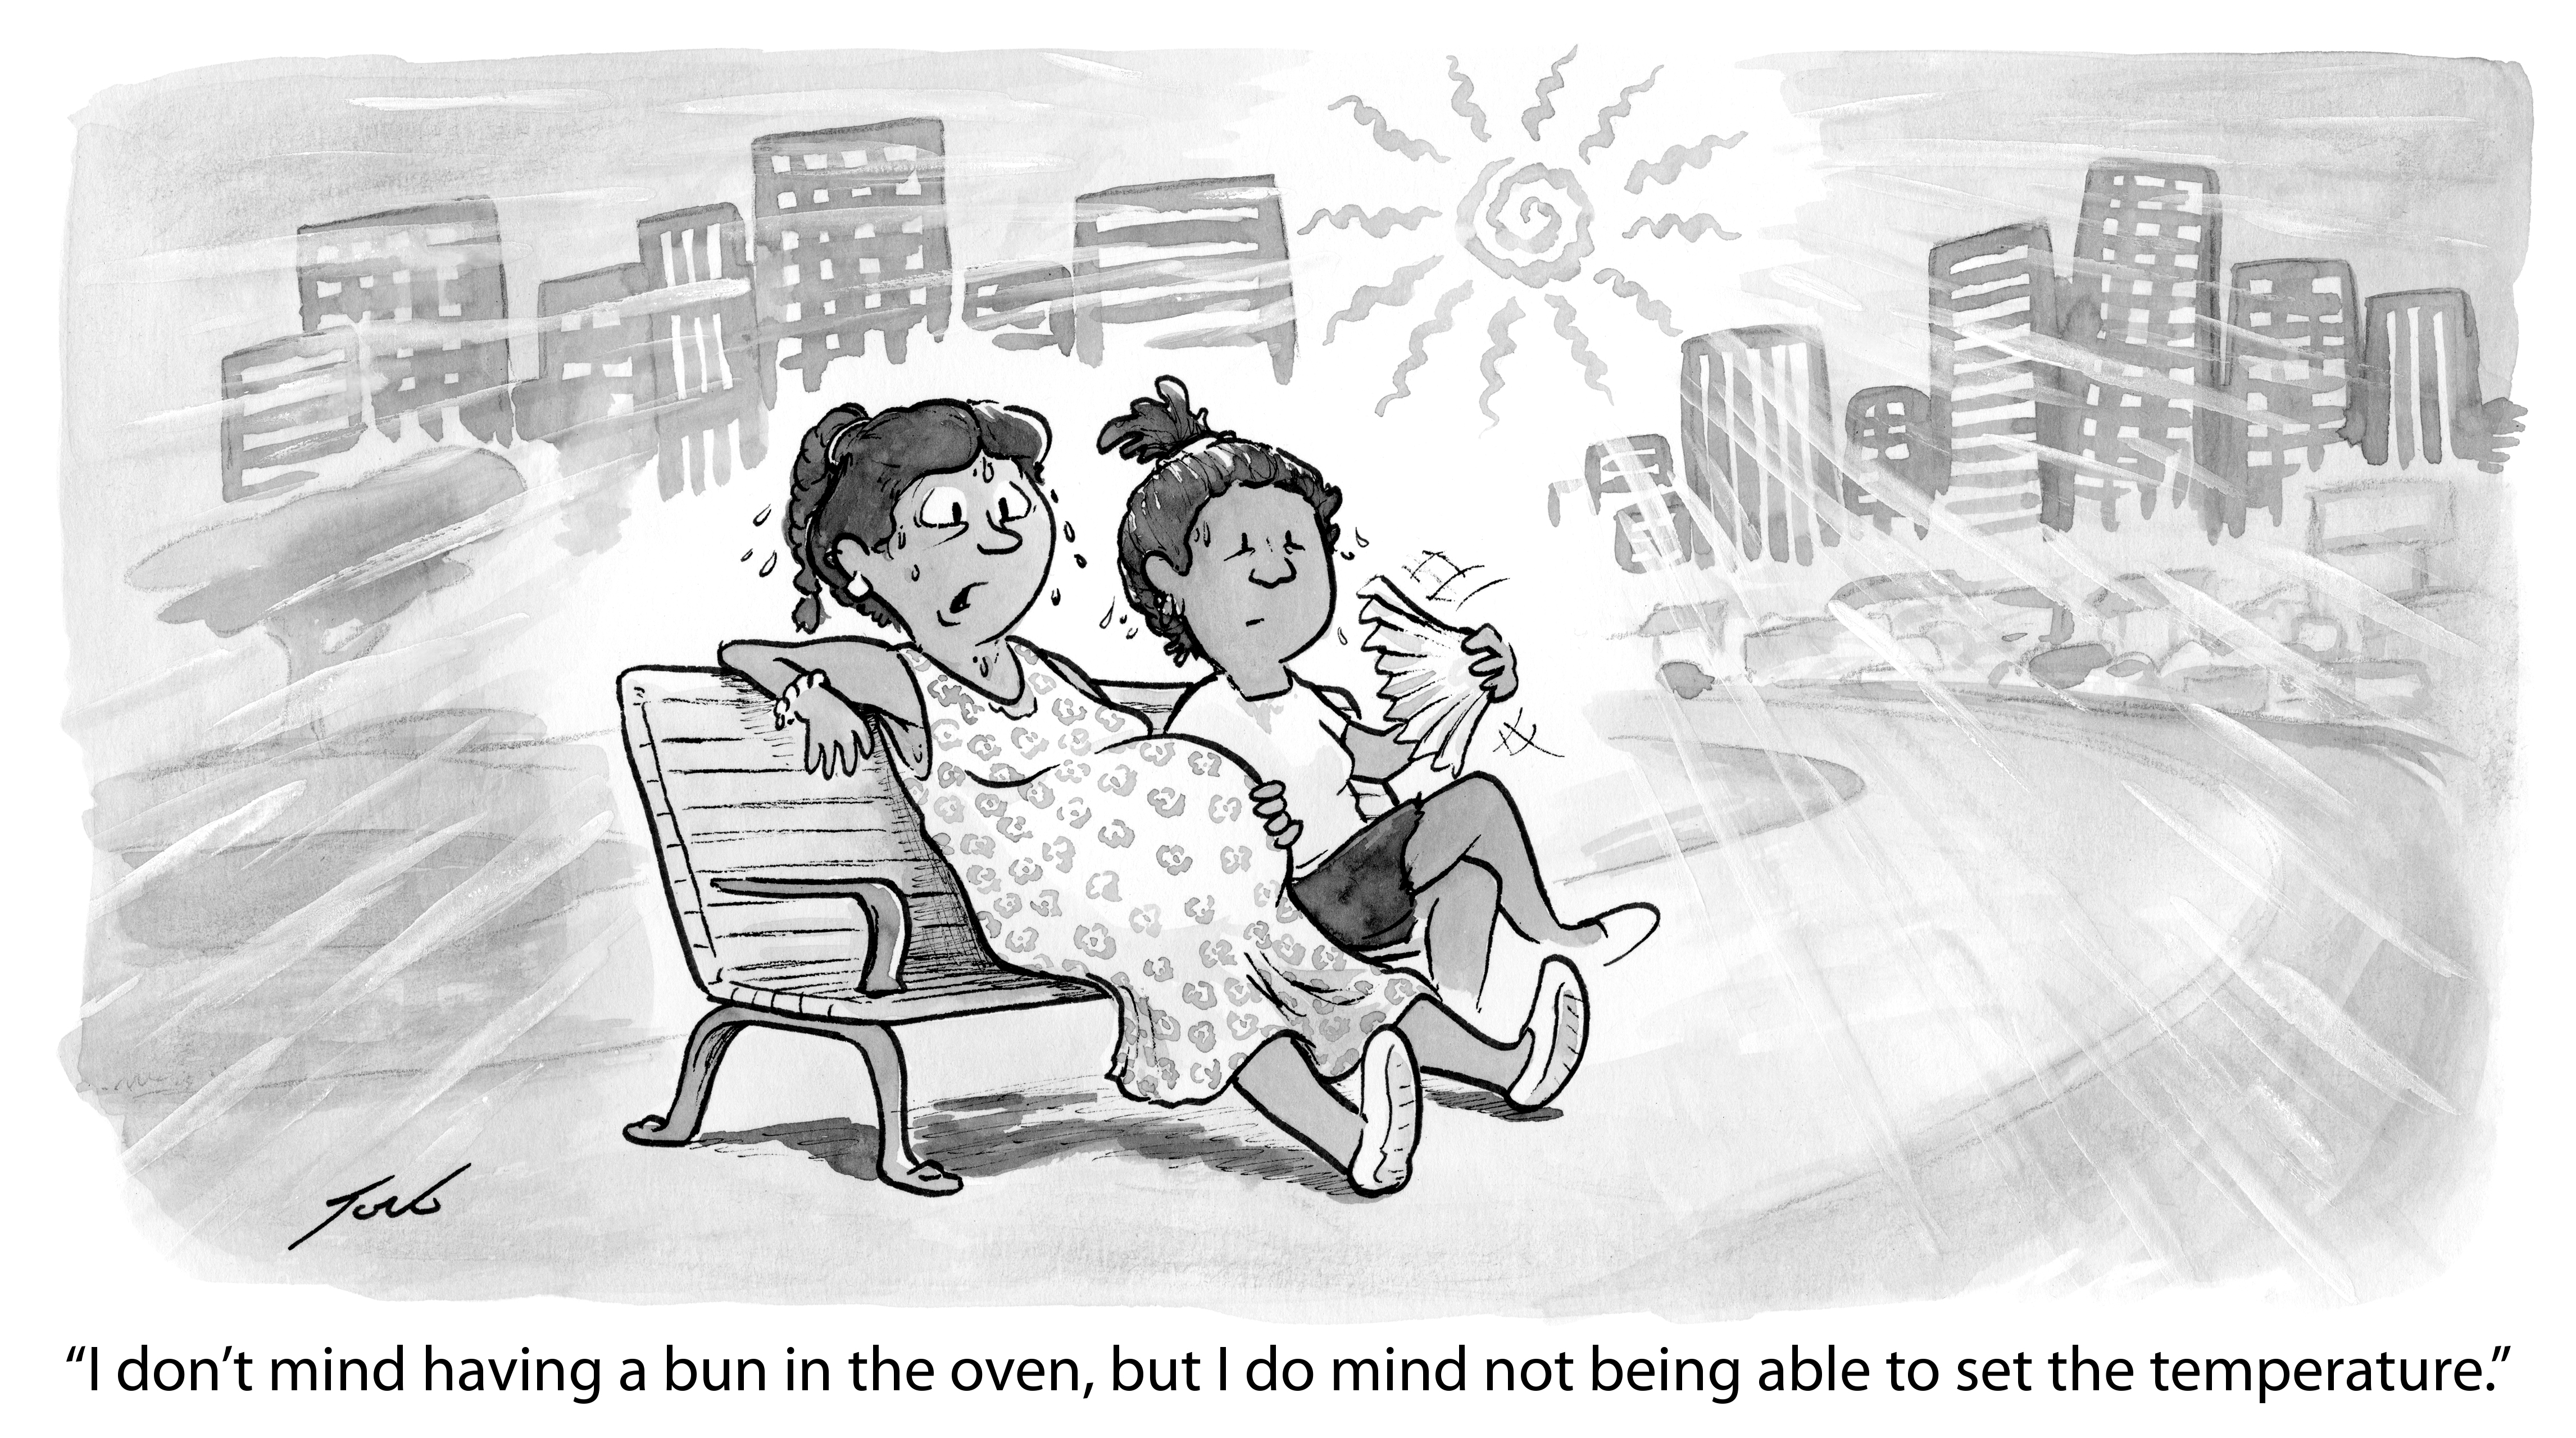 This cartoon features two people sitting on a bench. One is pregnant. The cartoon says "I don't mind having a bun in the oven, but I do mind not being able to set the temperature."